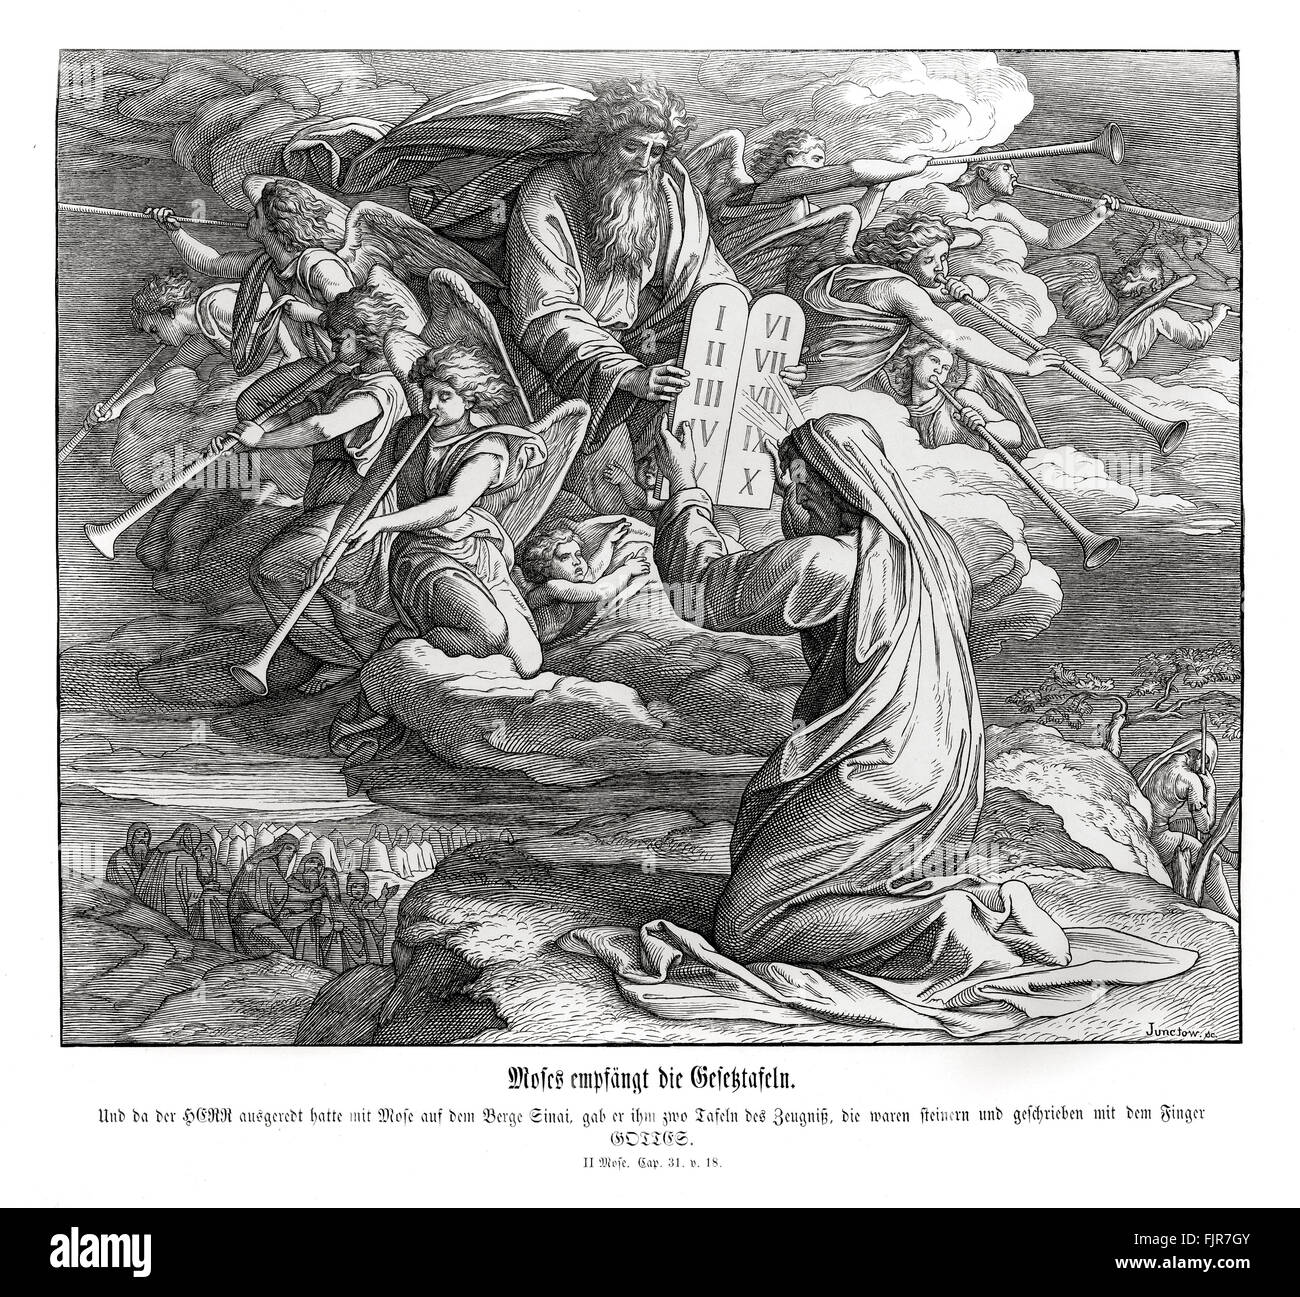 Moses receives the commandments, Exodus chapter XXXI verse 18 'And he gave unto Moses, when he had made an end of communing with him upon mount Sinai, two tables of testimony, tables of stone, written with the finger of God.' 1852-60 illustration by Julius Schnorr von Carolsfeld Stock Photo